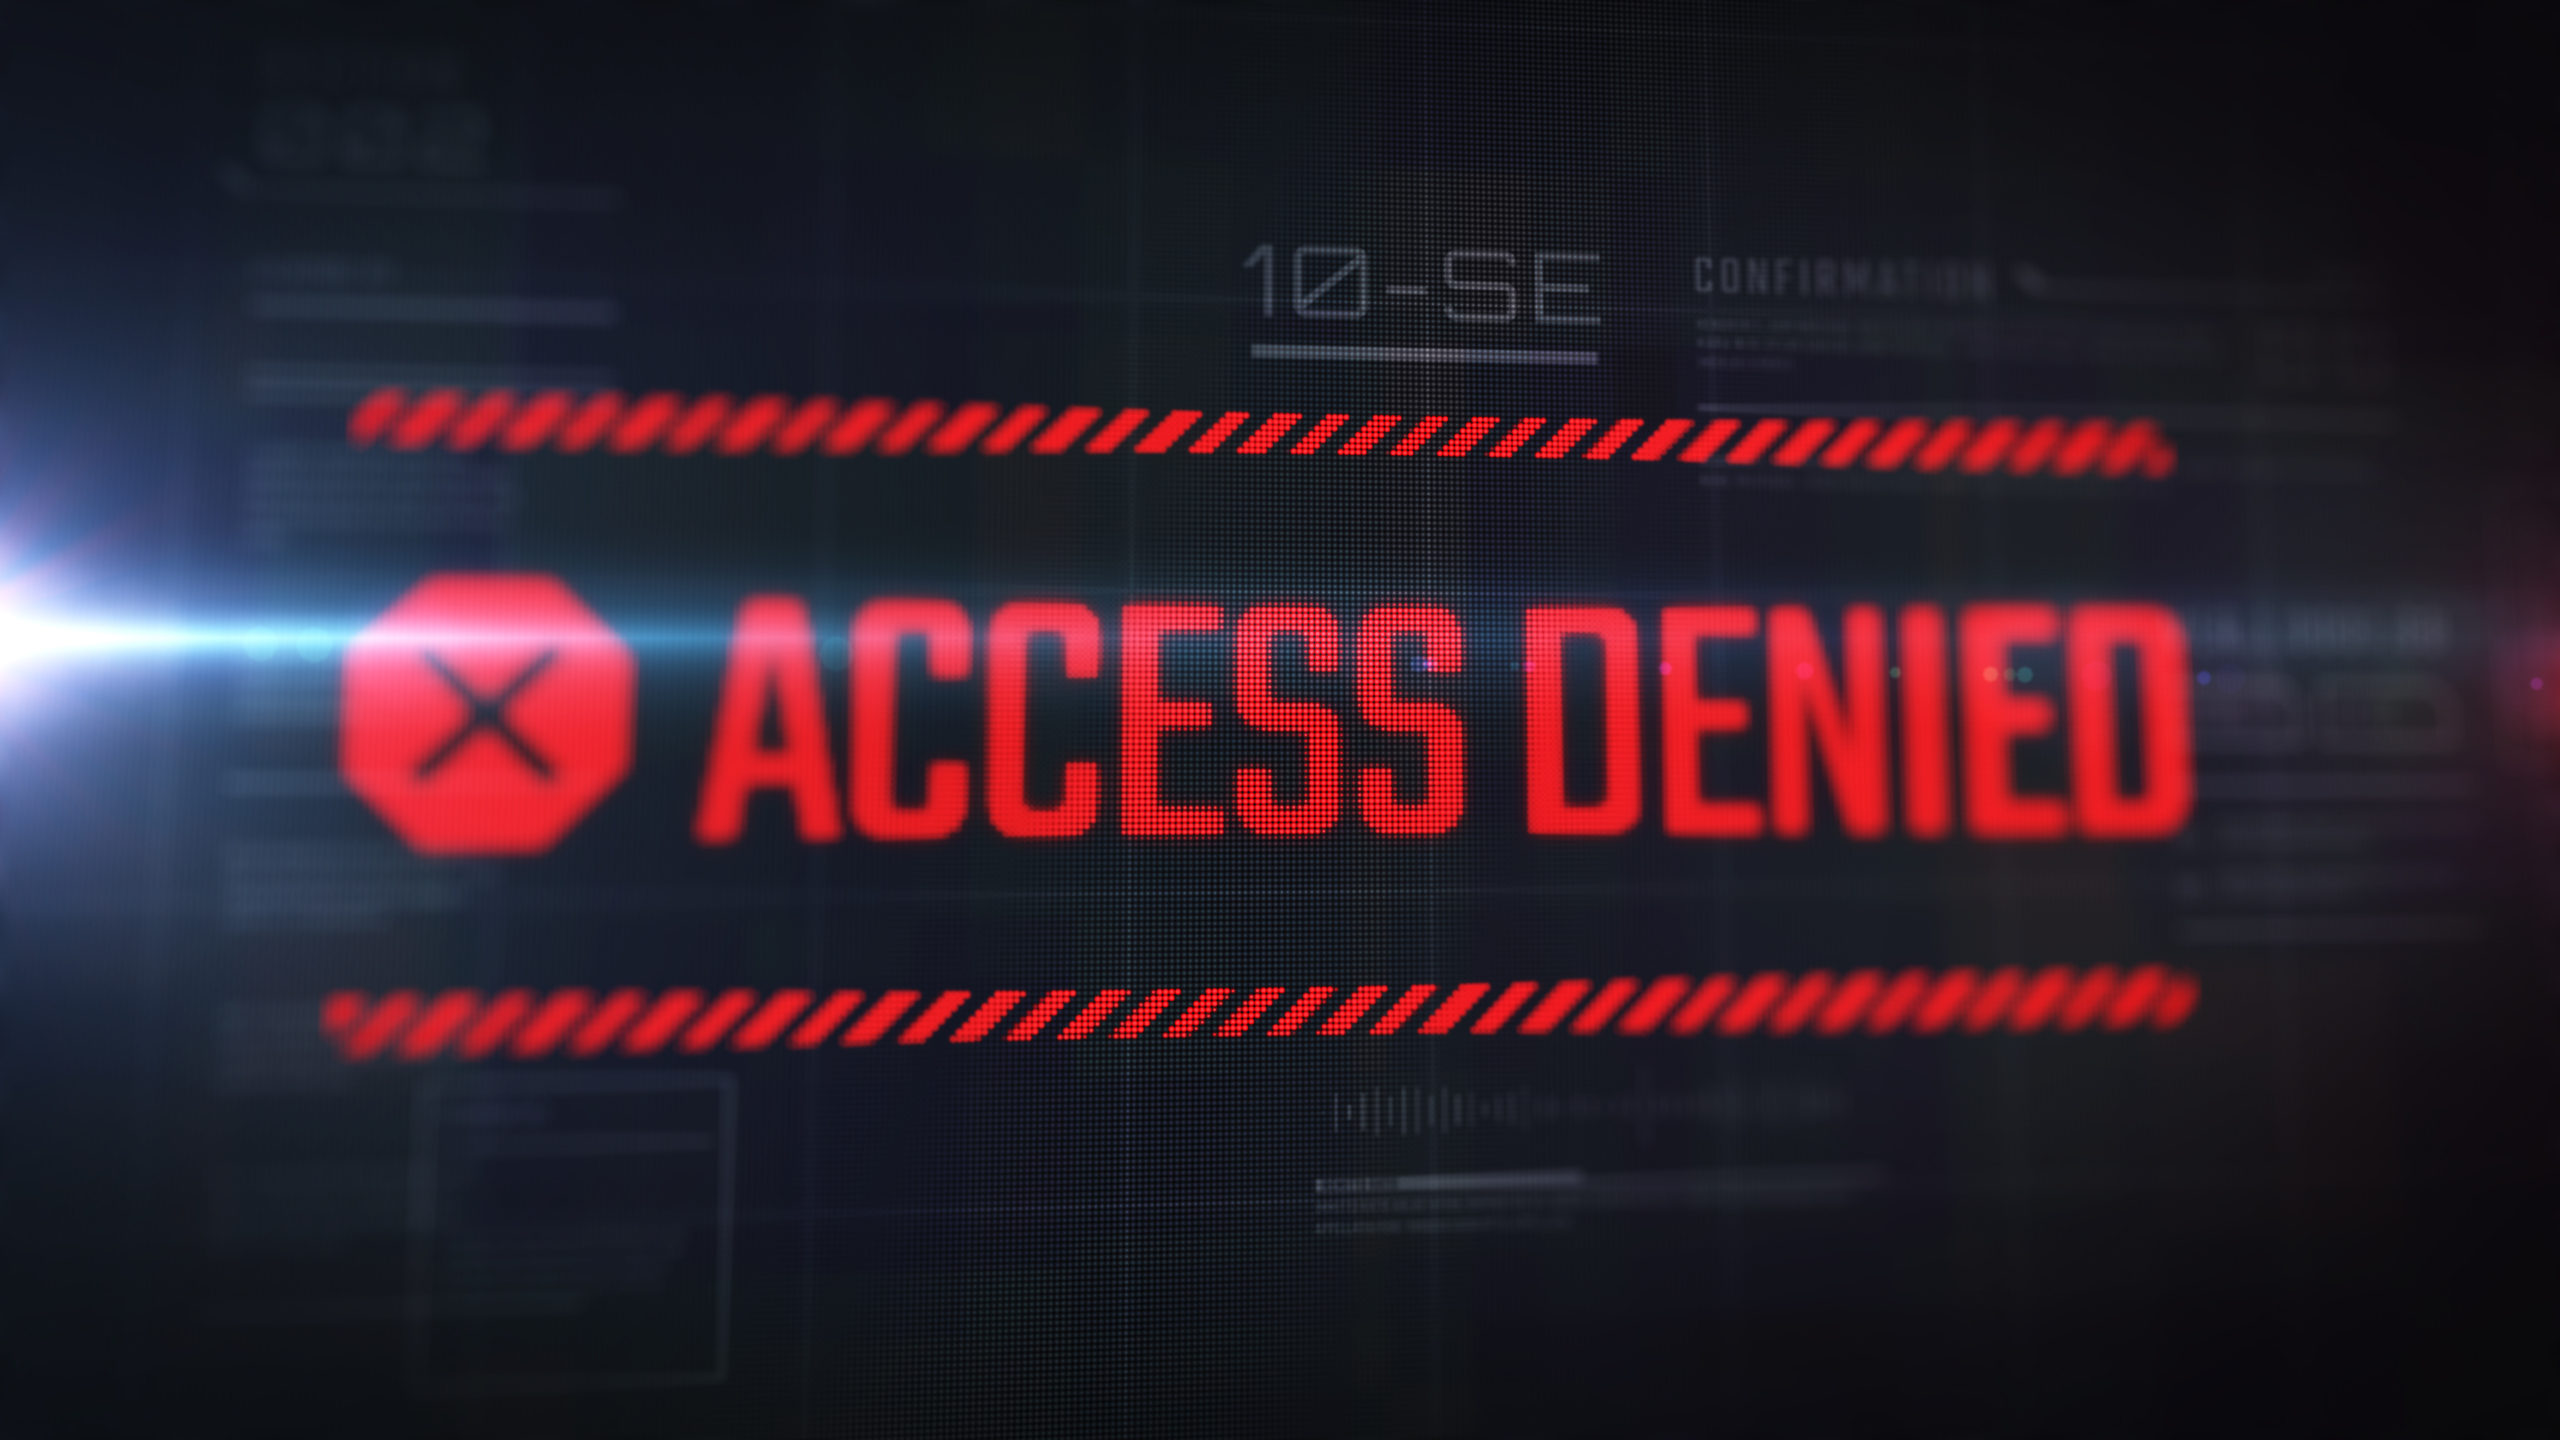 Pull access denied for